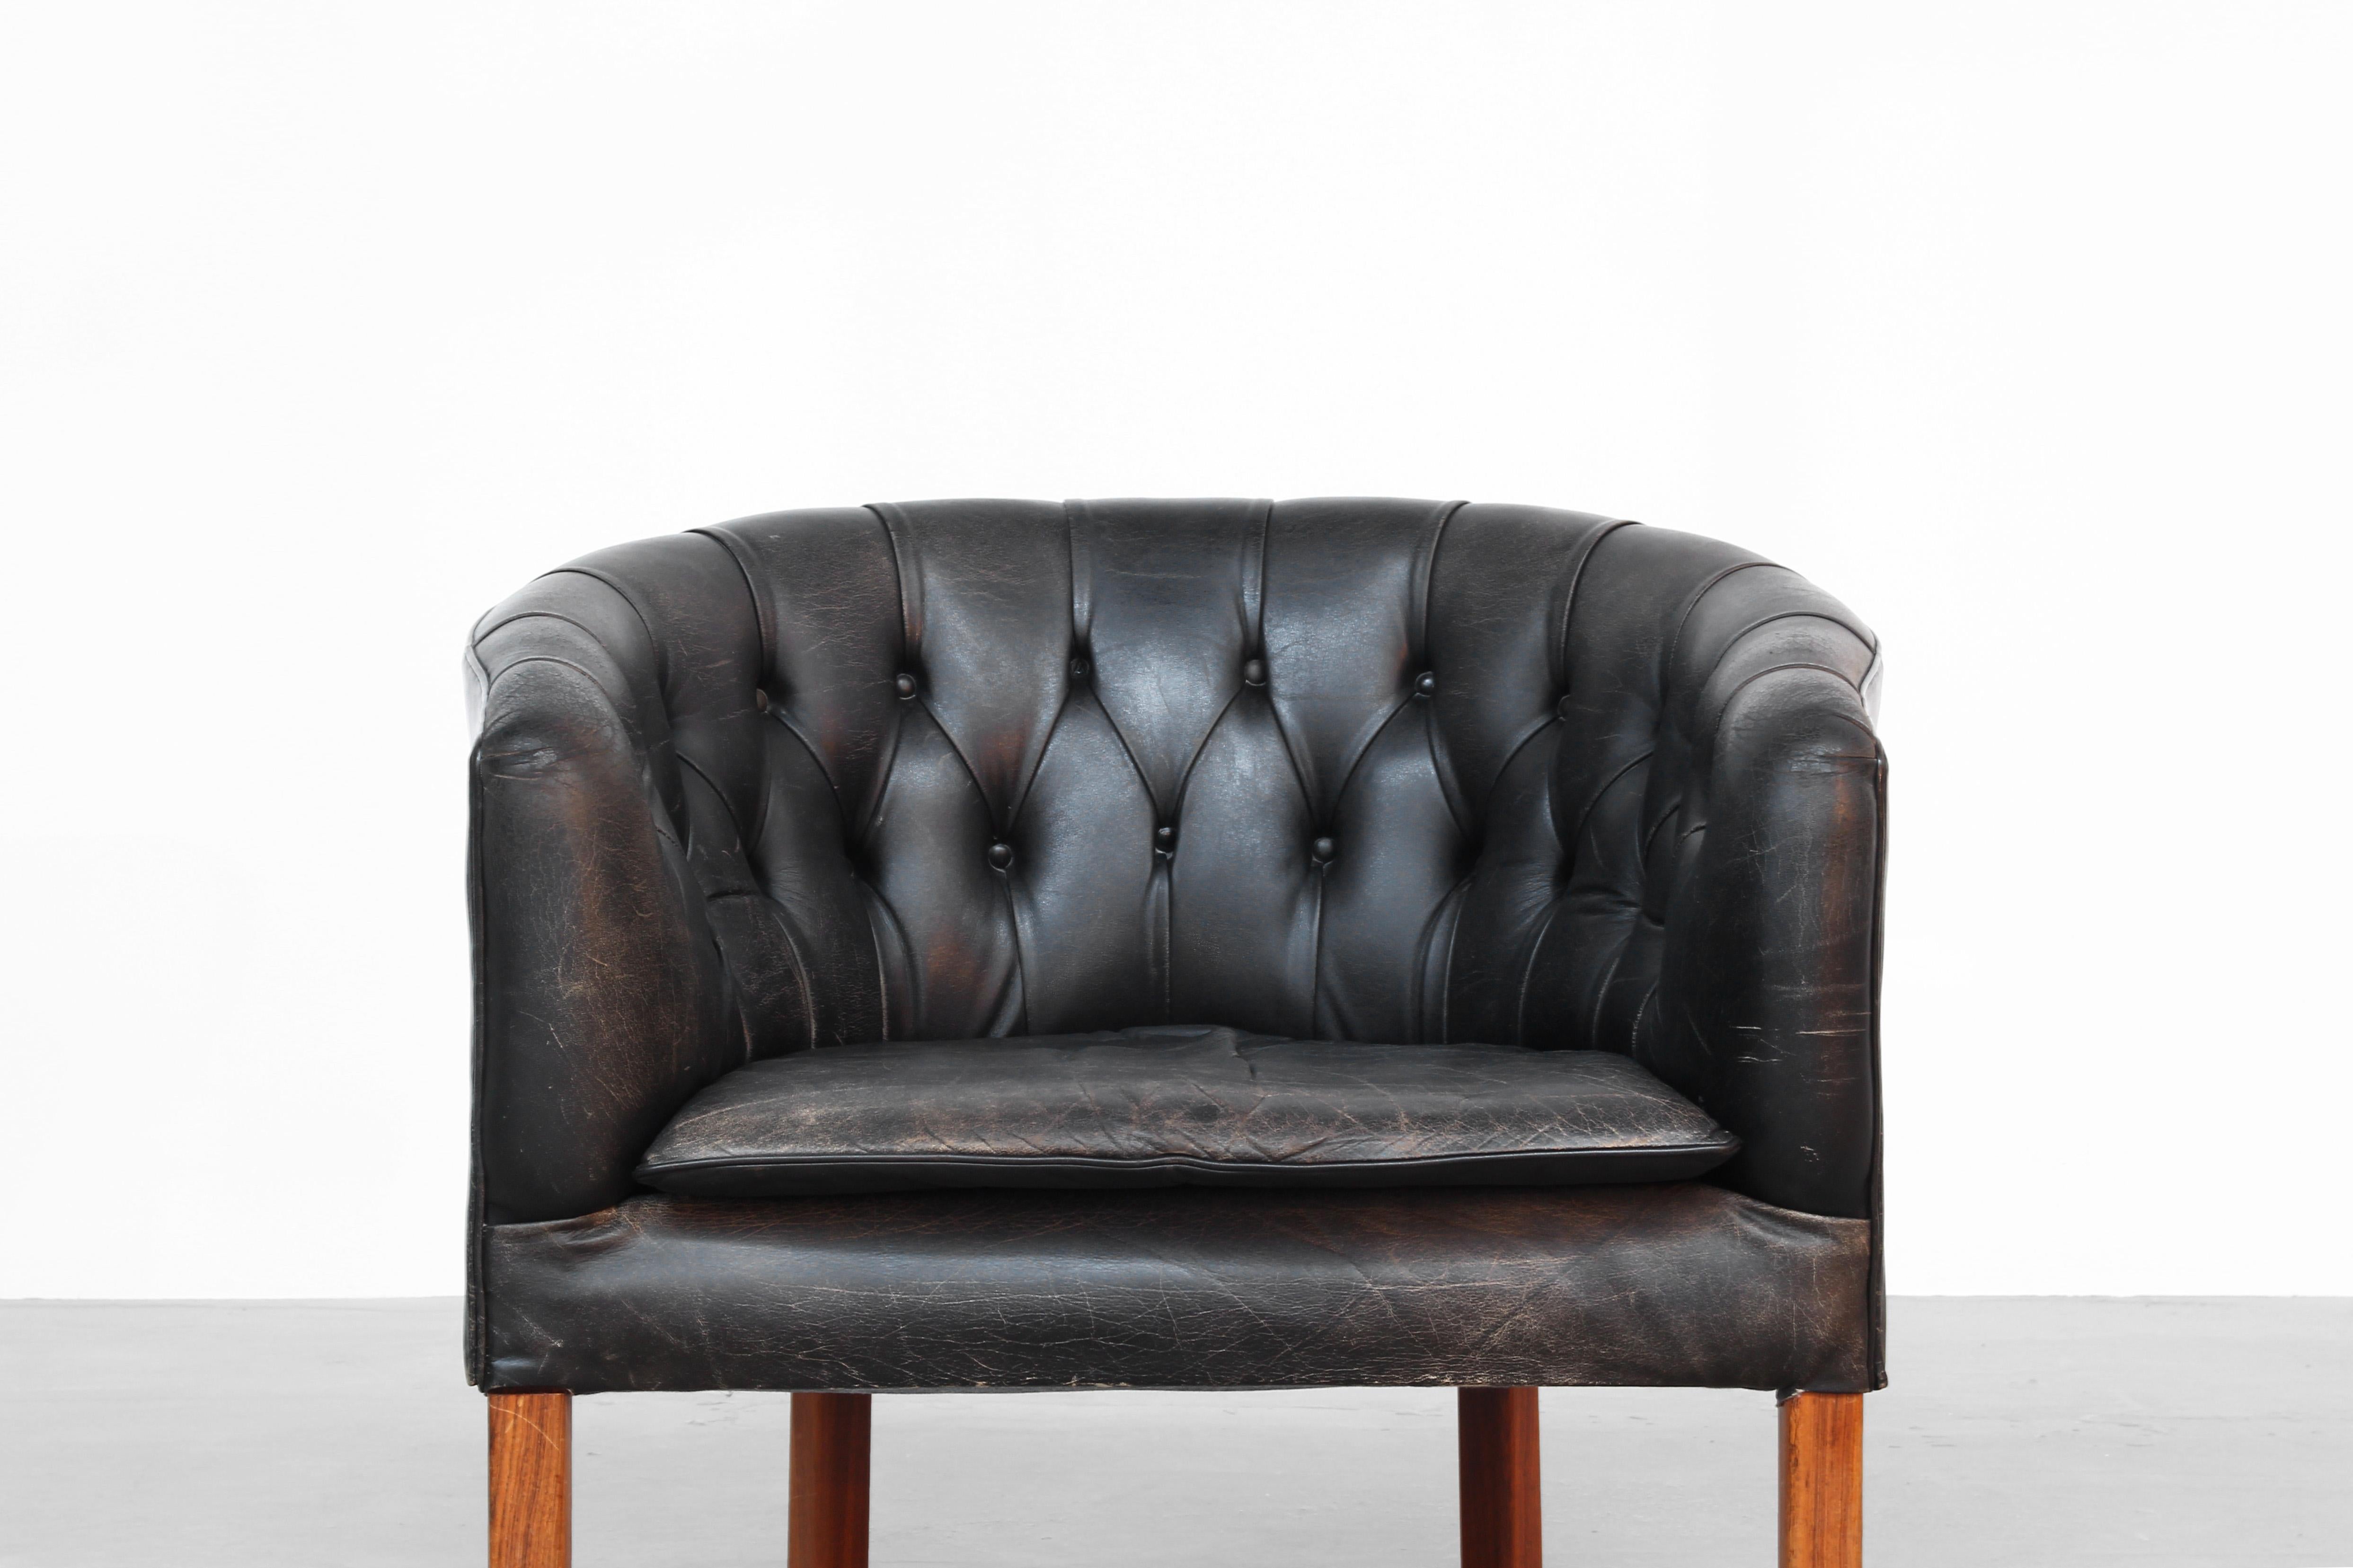 Pair of Tufted Danish Lounge Chairs Attributed to Kaare Klint Borge Mogensen In Fair Condition For Sale In Berlin, DE